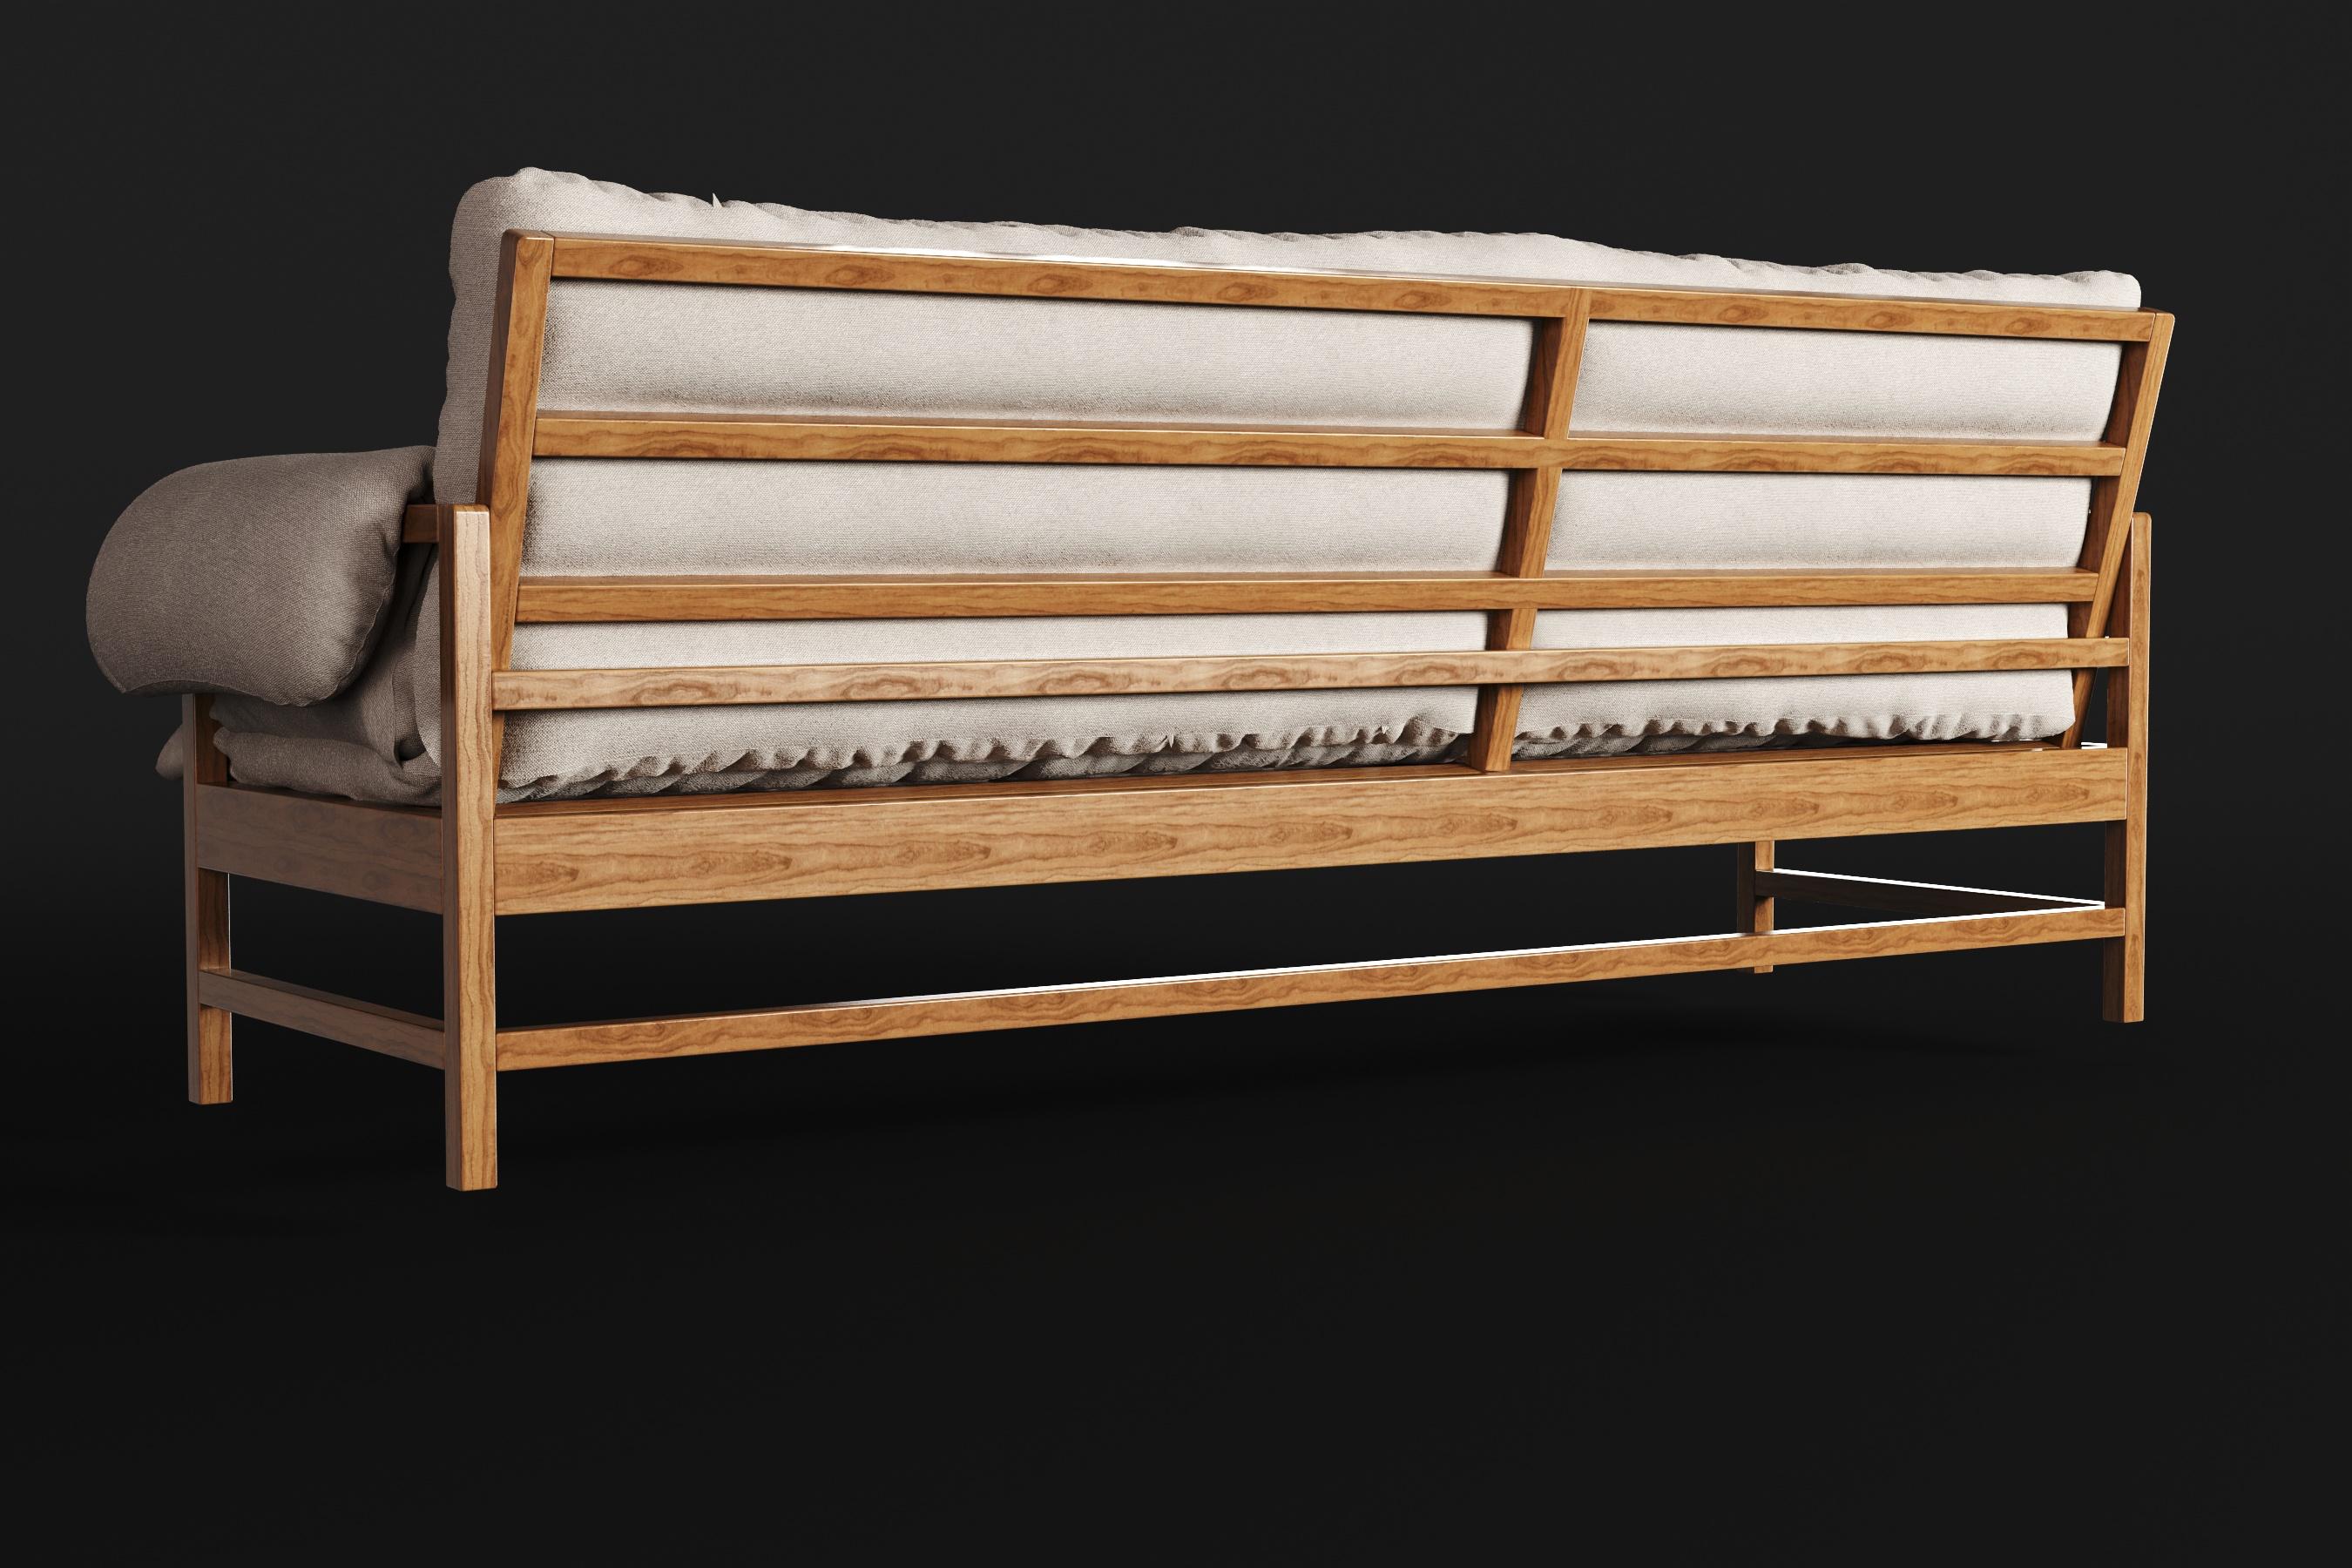 Hand-Crafted The Lazy. Brazilian solid wood with linen upholstery Design by Amilcar Oliveira For Sale